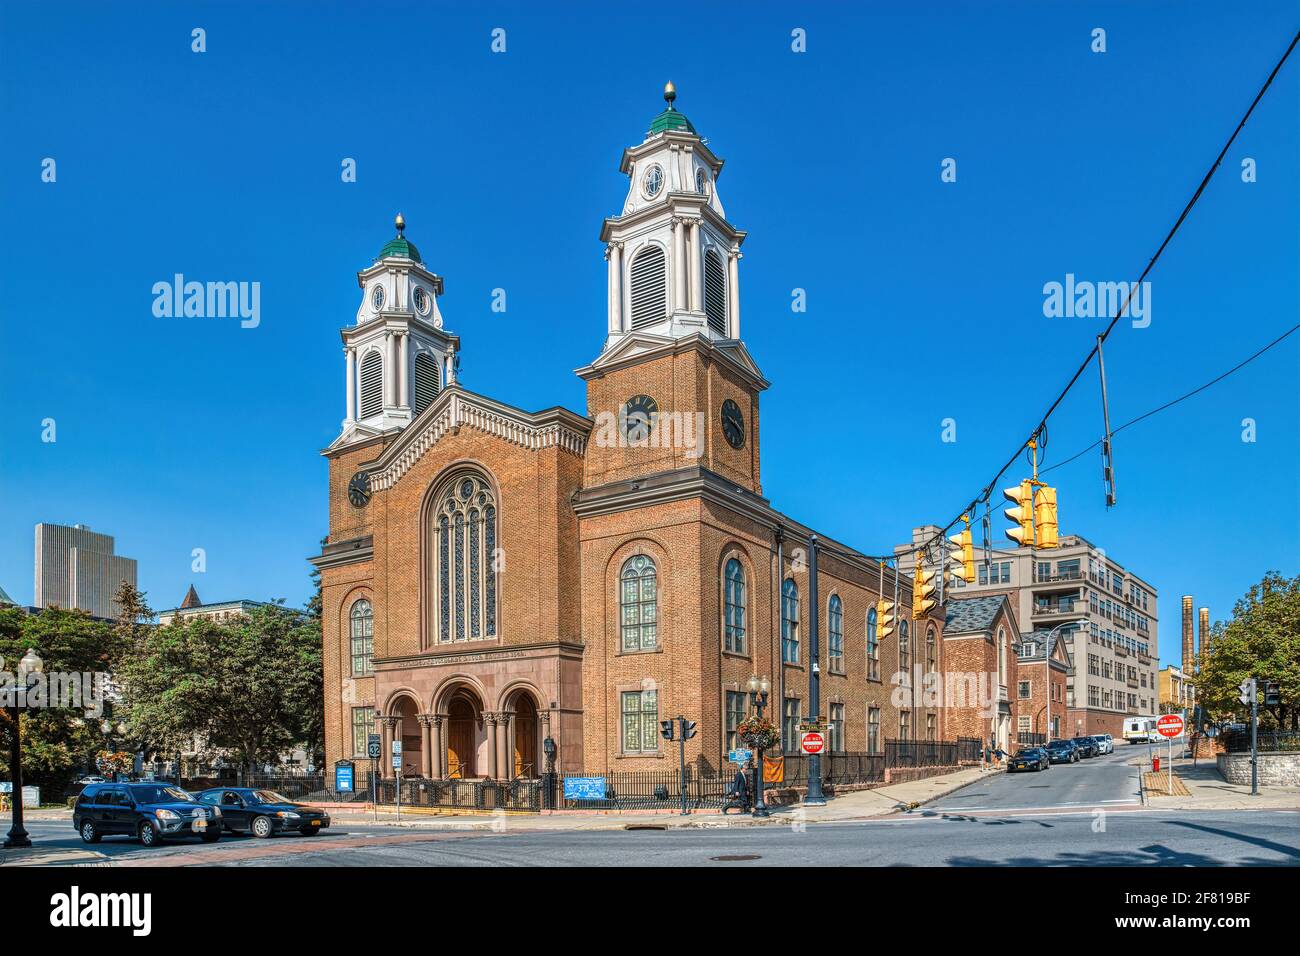 First Church in Albany, Dutch Reformed Church of Albany, is a landmark church at 110 North Pearl Street in downtown Albany. Stock Photo